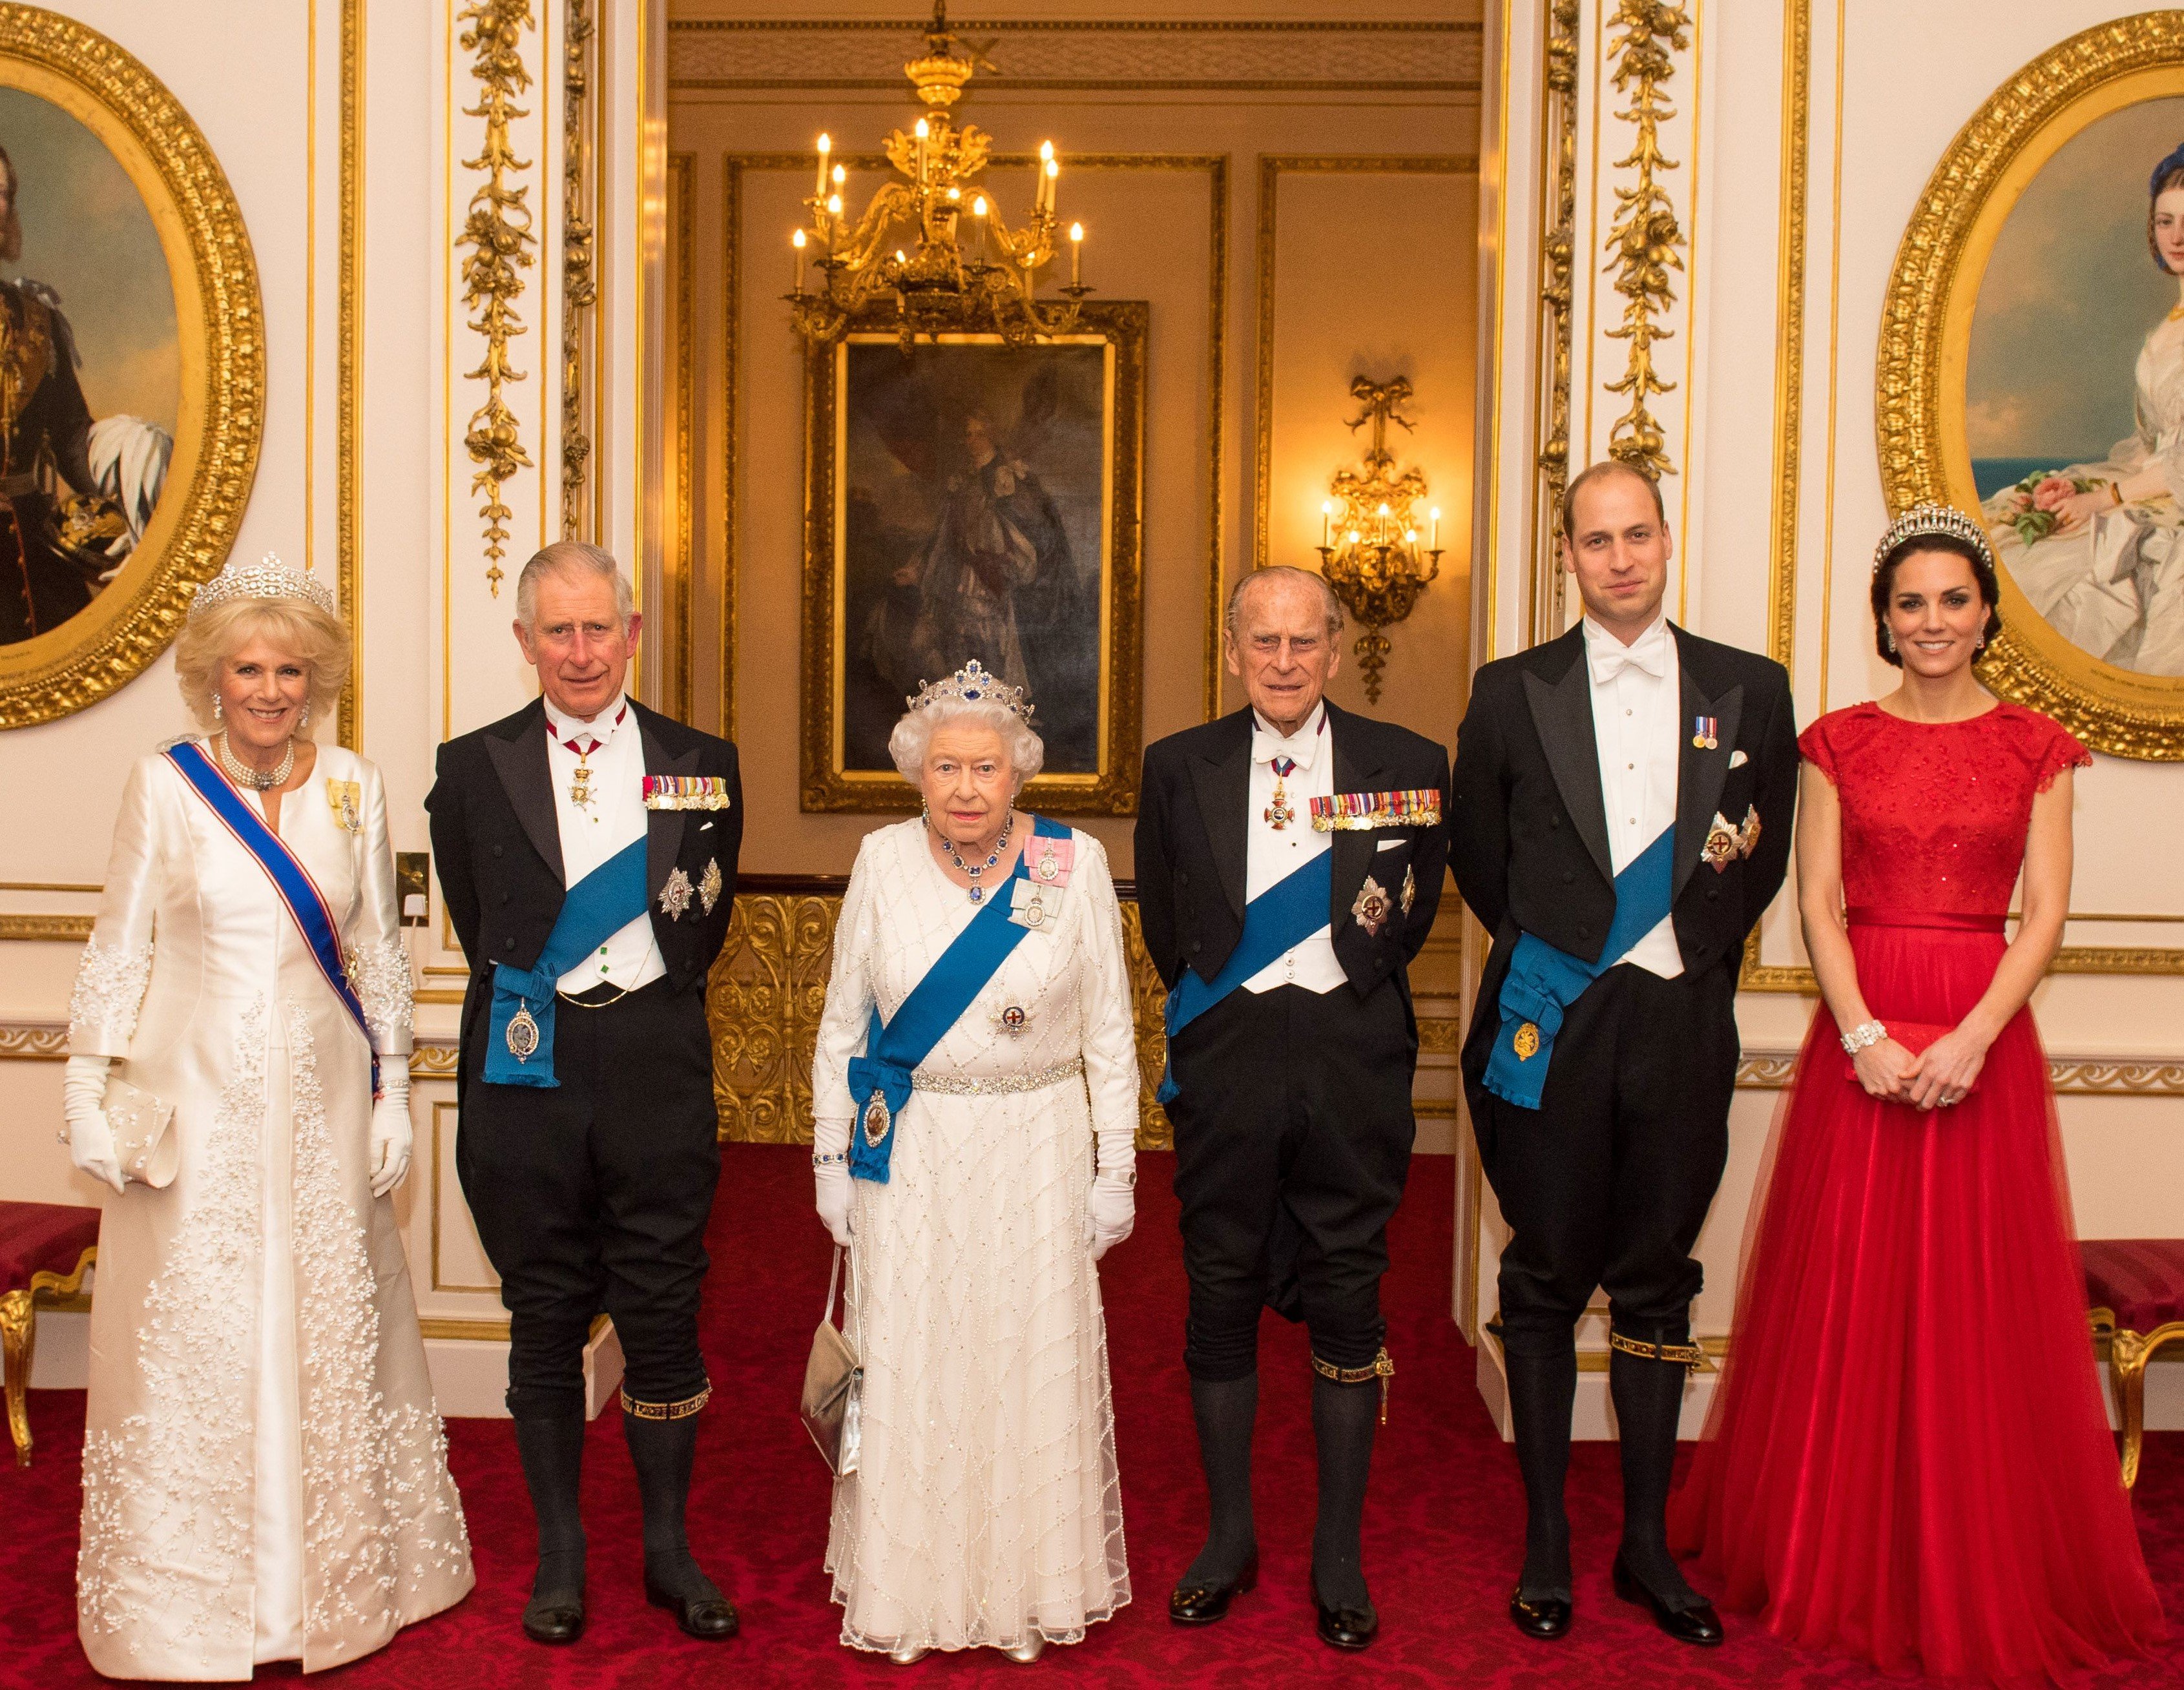 (L to R): Camilla Parker Bowles, Prince Charles, Queen Elizabeth II, Prince Philip, Prince William, and Kate Middleton